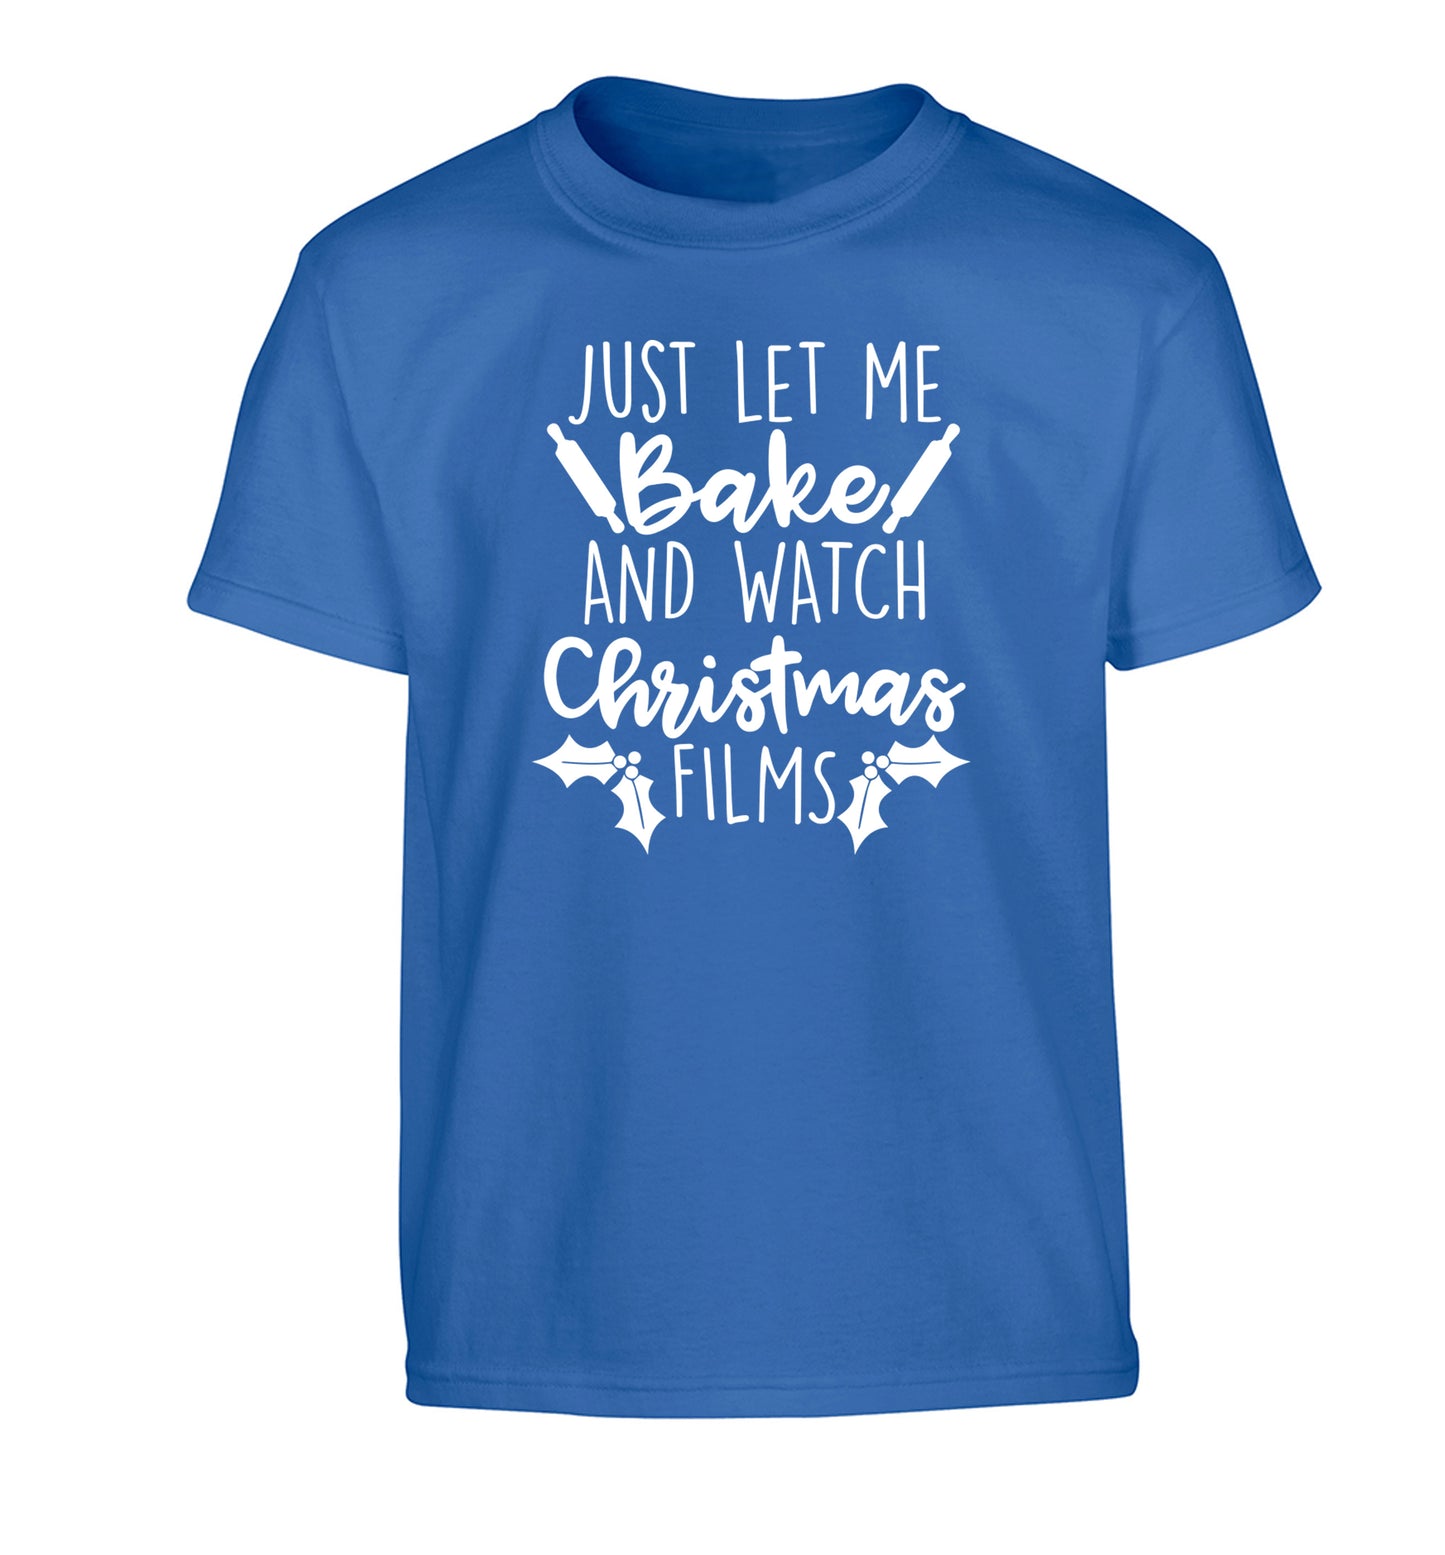 Just let me bake and watch Christmas films Children's blue Tshirt 12-14 Years